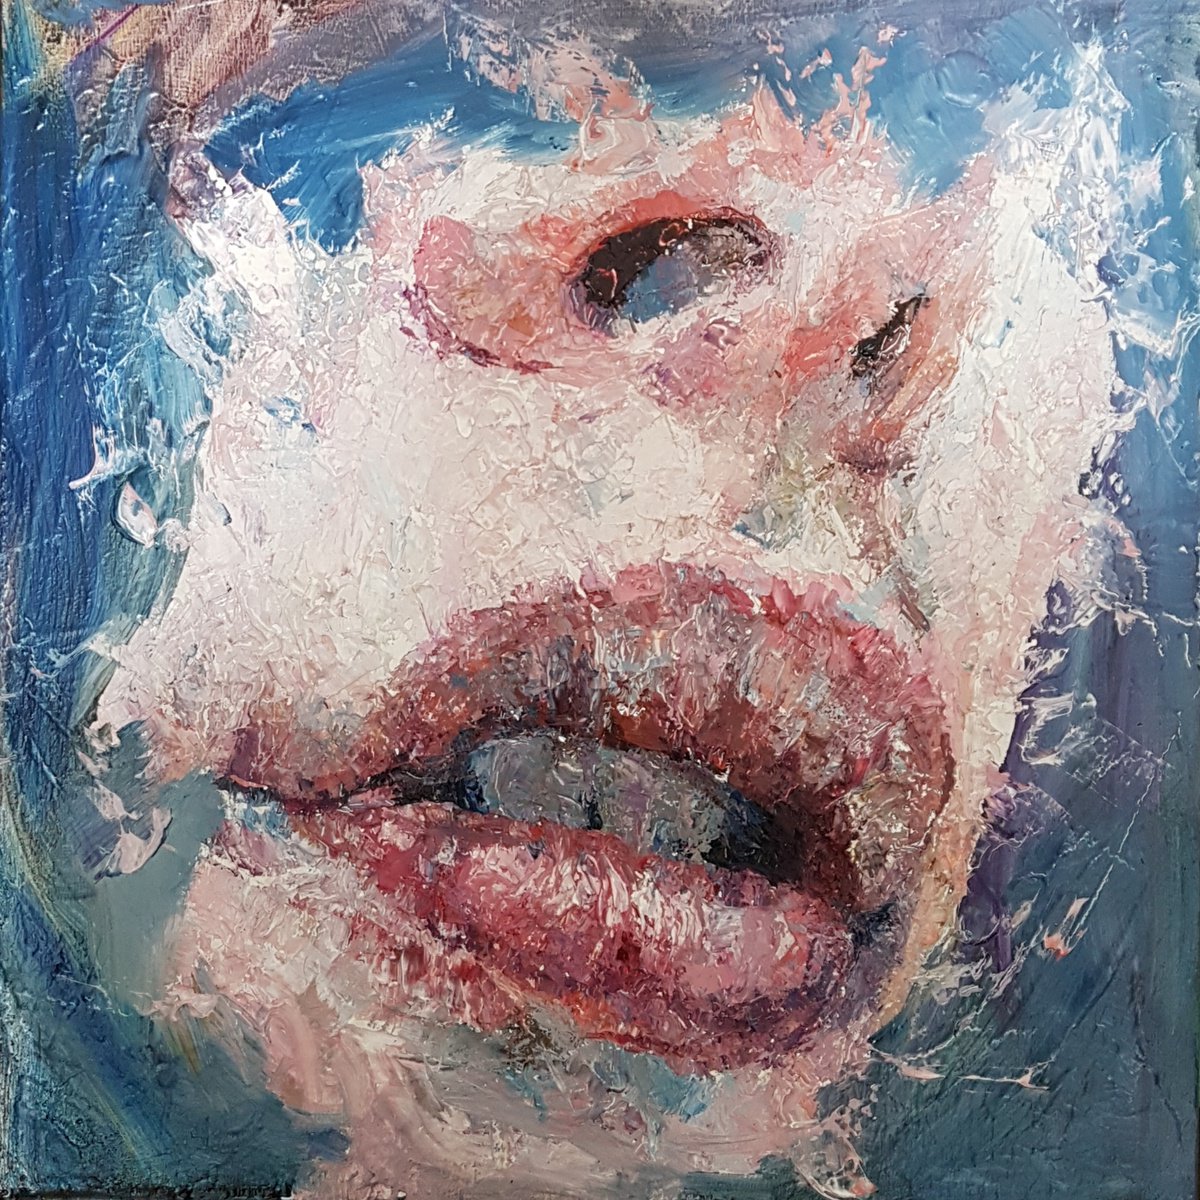 Mouth II by Alfonso Crespo